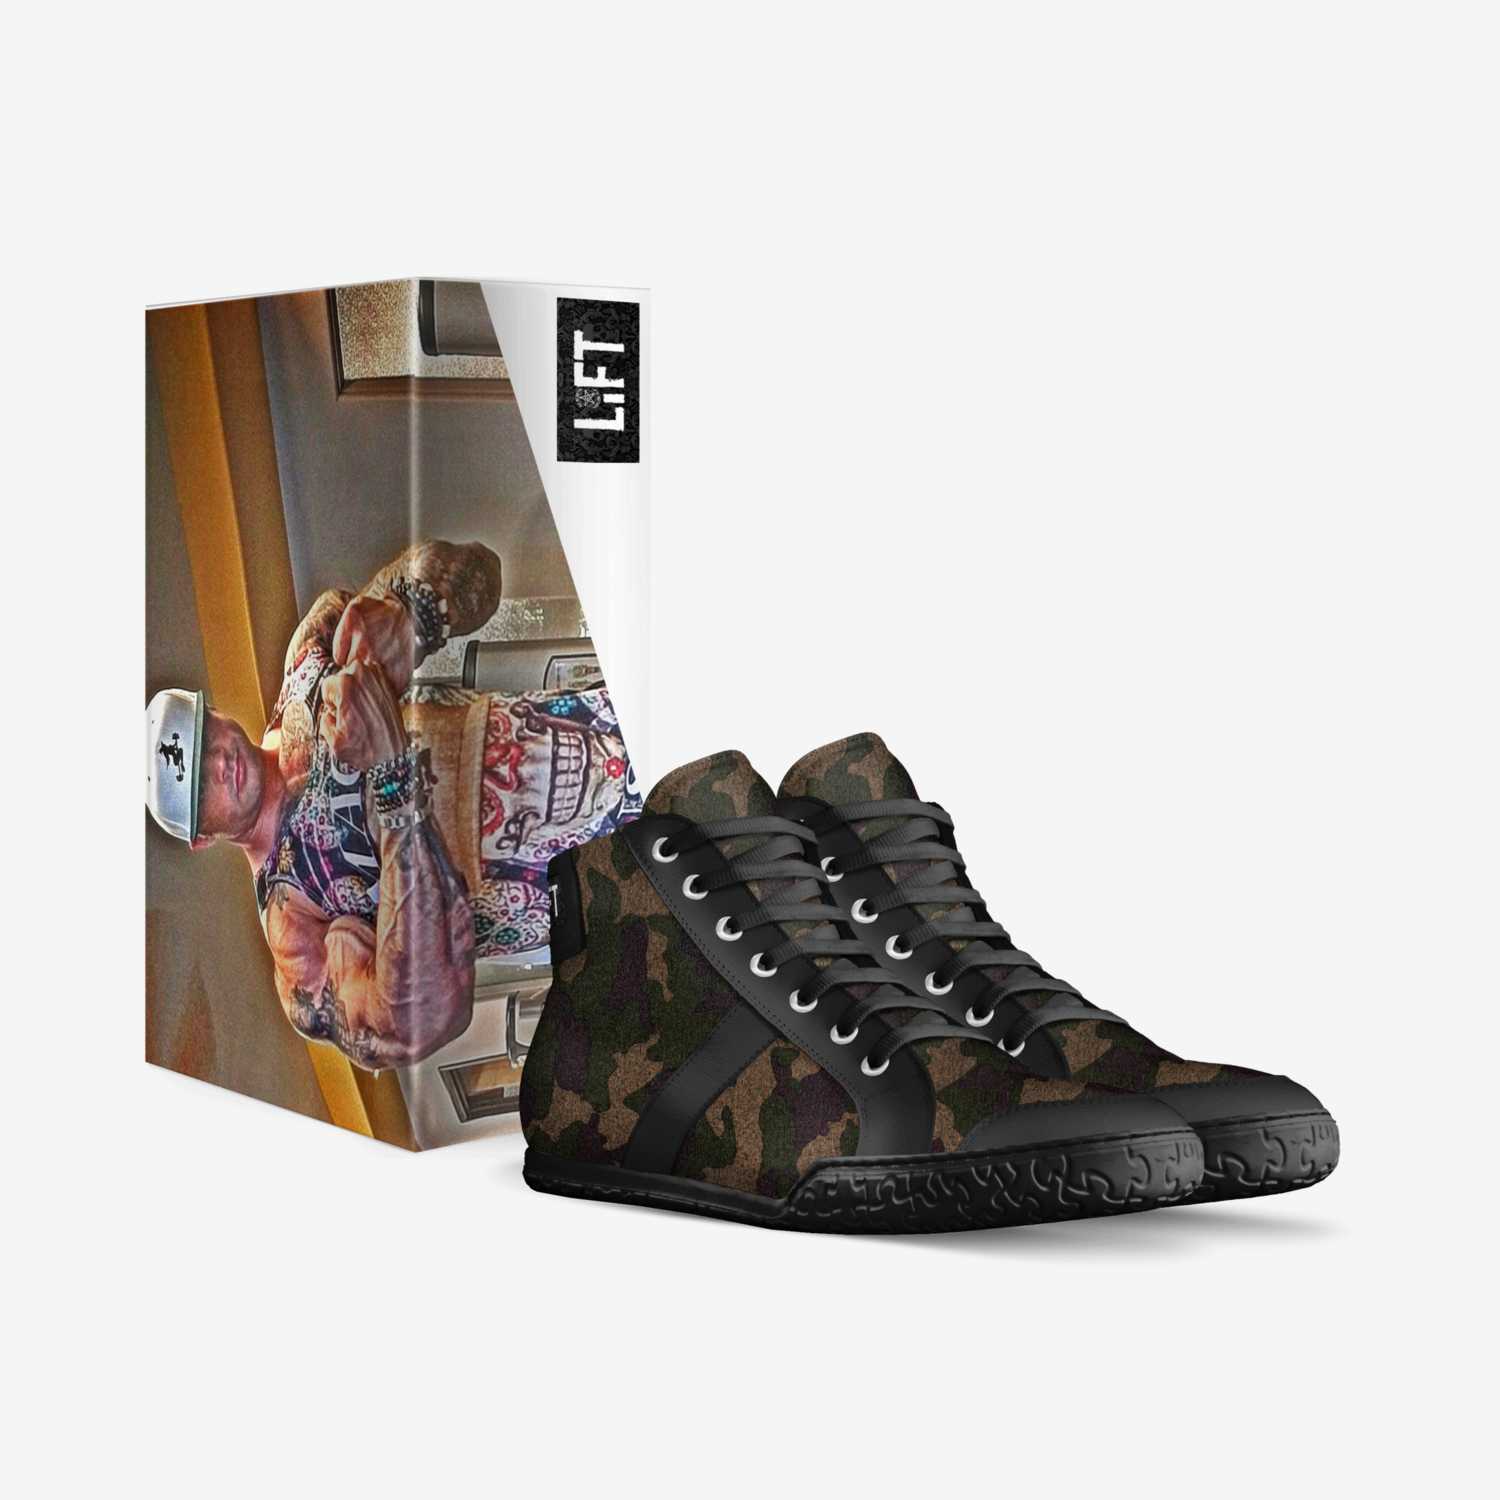 Camo custom made in Italy shoes by Robert Martin | Box view